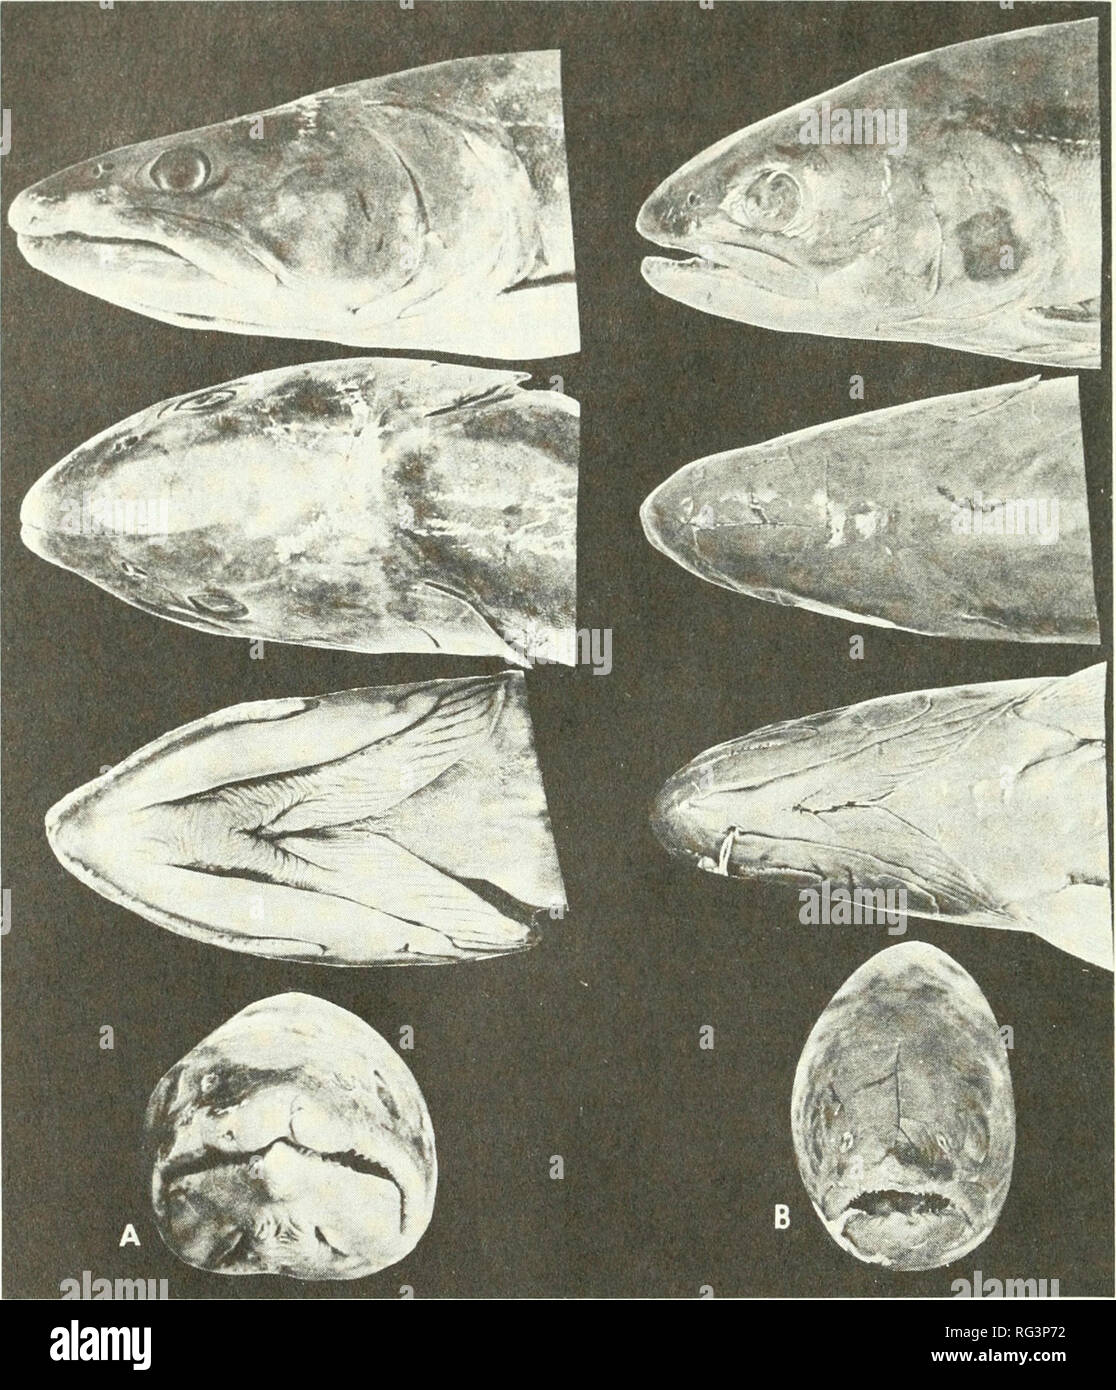 . California fish and game. Fisheries -- California; Game and game-birds -- California; Fishes -- California; Animal Population Groups; Pêches; Gibier; Poissons. 150 CALIFORNIA FISH AND CAME. FIGURE 3. Head form (lateral, dorsal, ventral, and frontal views) in the adult female of (A) Salvelinus confluentus, NMC 66-437, 580 mm, Finlay R. trib., Brit. Col.; (B) Salvelinus malma, UMMZ 126507, 289 mm, Karluk R., Kodiak I., Alaska. Photograph by the author. in S. malma is directed dorsally, whereas in S. confluentus it has a slightly more anterodorsal orientation. The upper jaw of the bull trout in Stock Photo